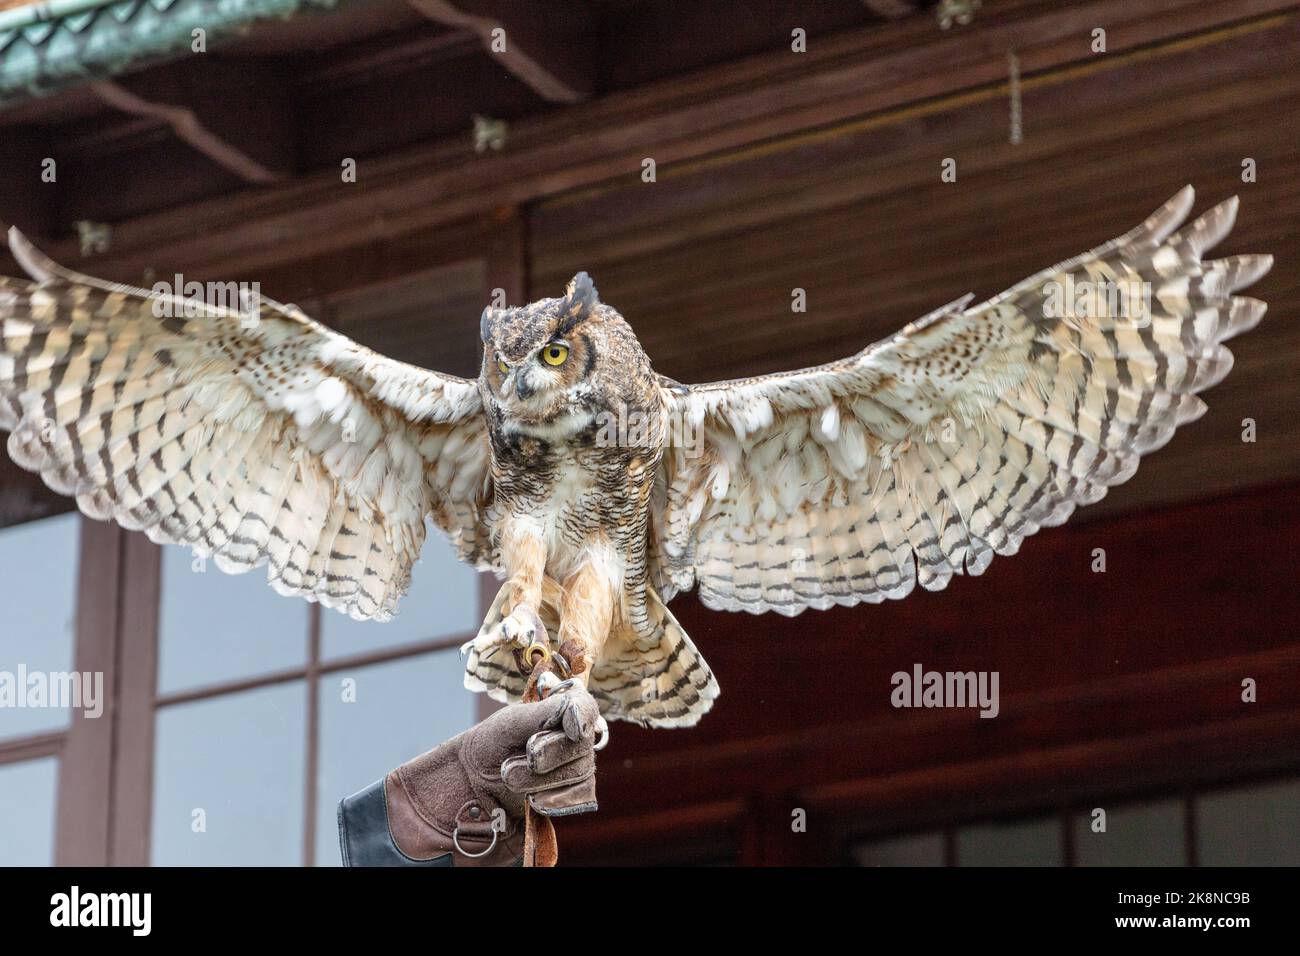 An educational demonstration about owls Stock Photo